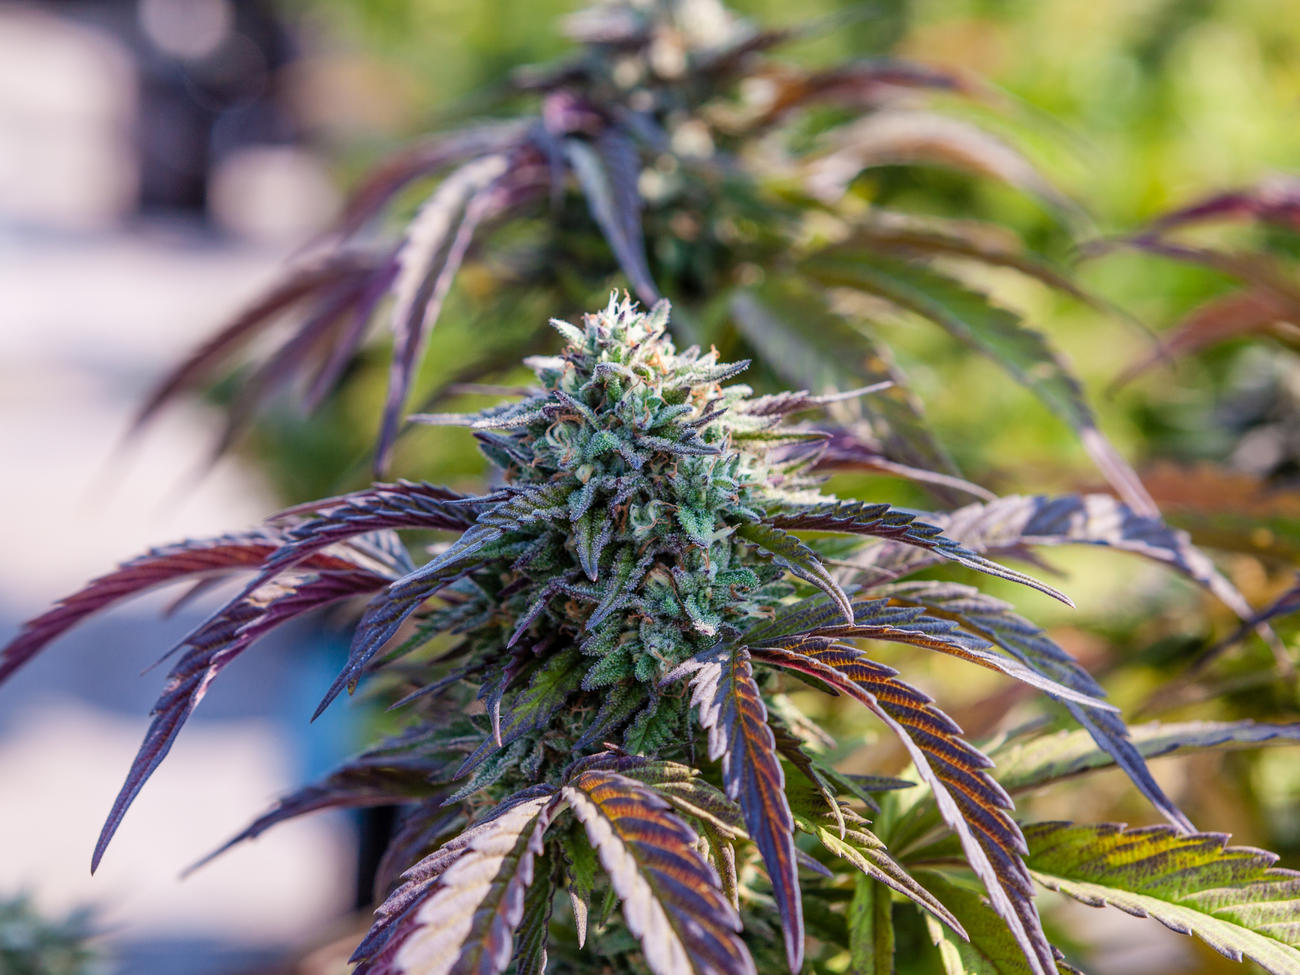 Preferred climate and growing conditions for growing promising autoflowering seeds outdoor